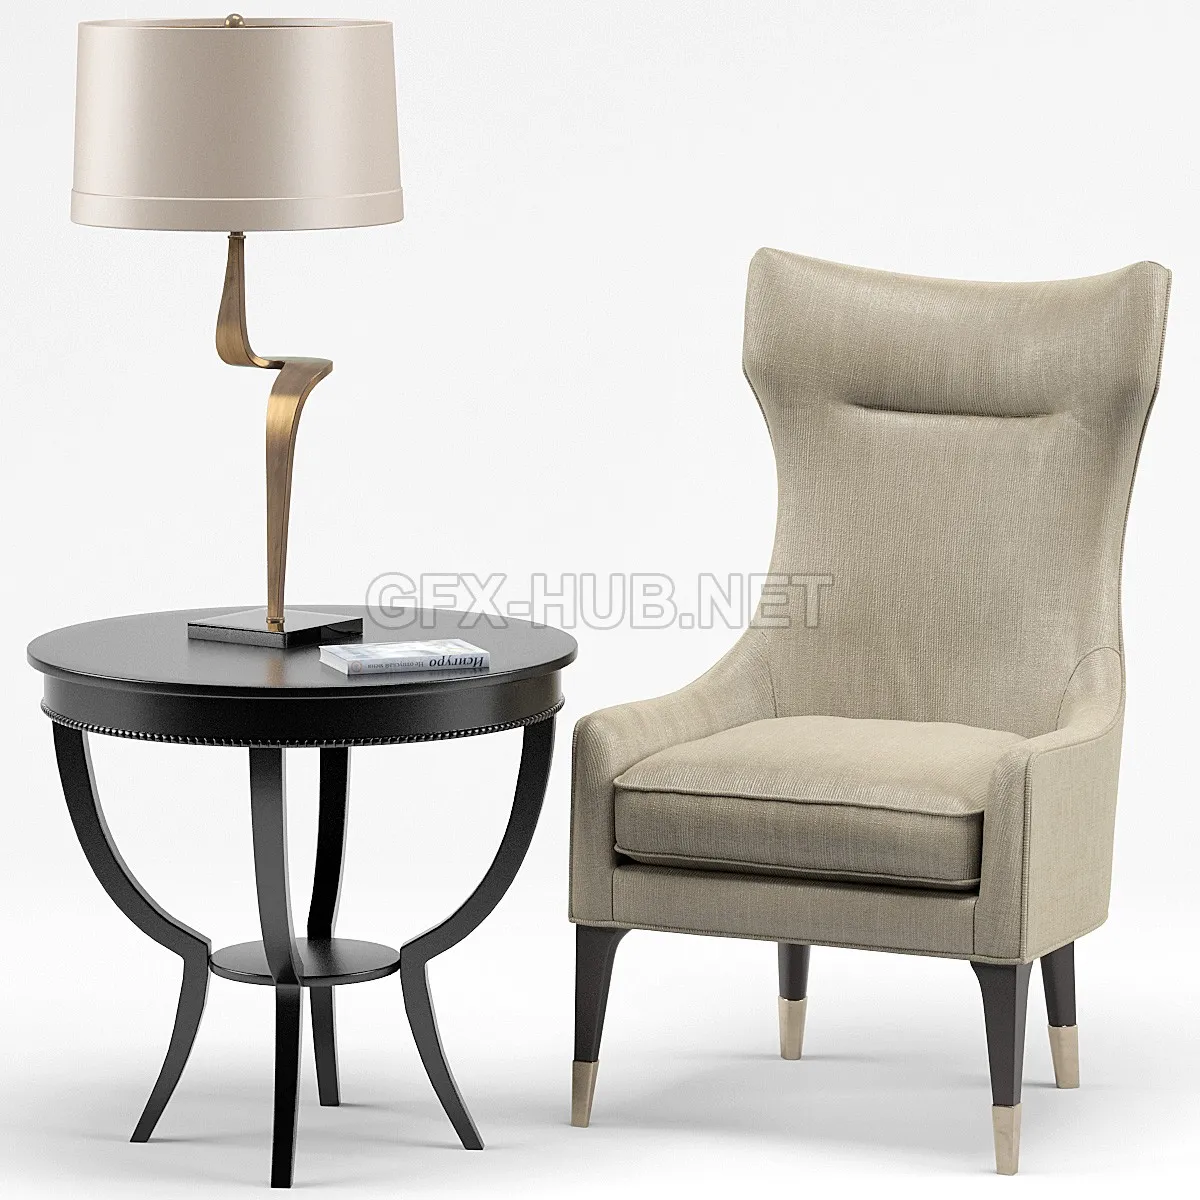 FURNITURE 3D MODELS – Gina Chair Thad Lamp Scheffield Round End Table